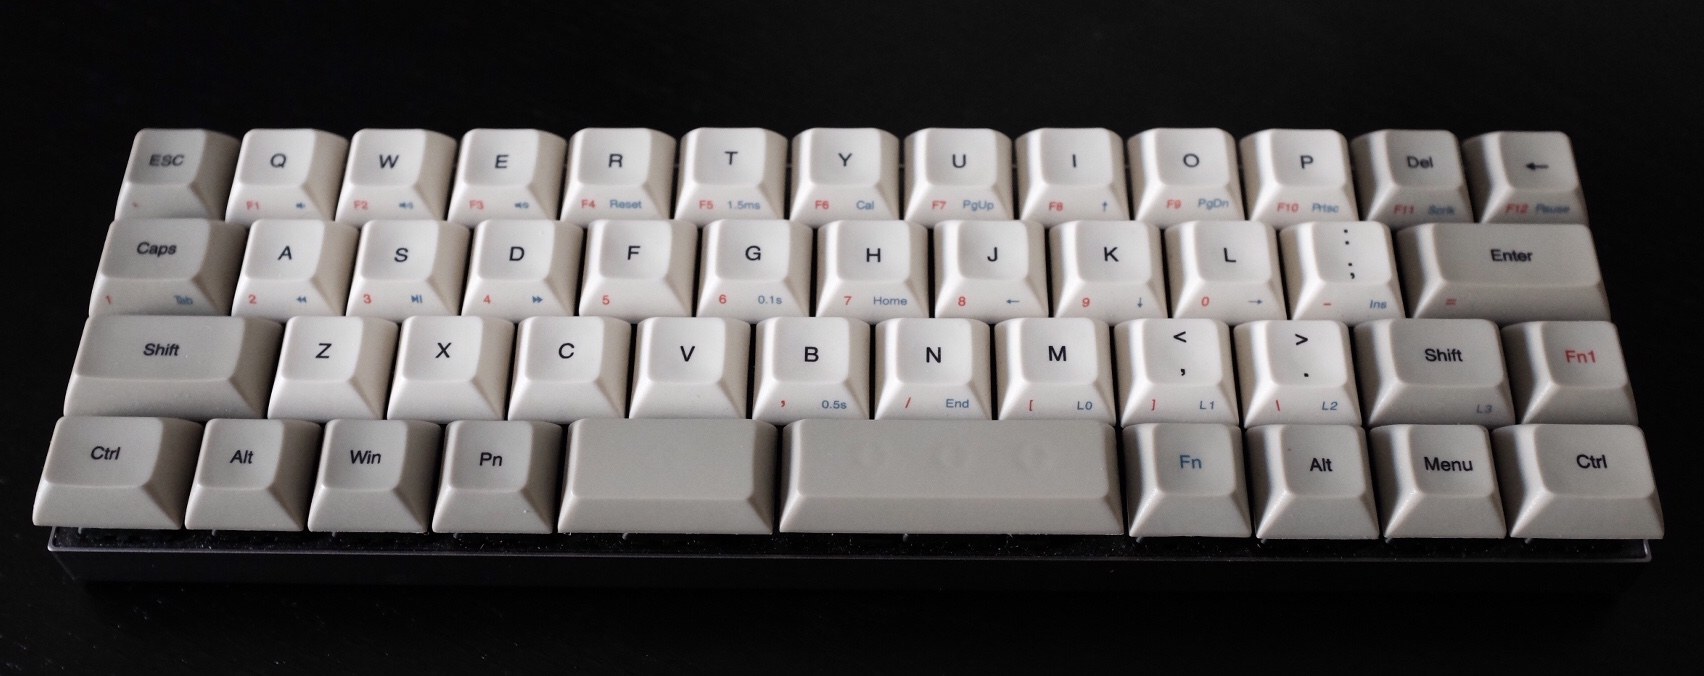 Vortex Core Mechanical Keyboard Review – Mauro Morales